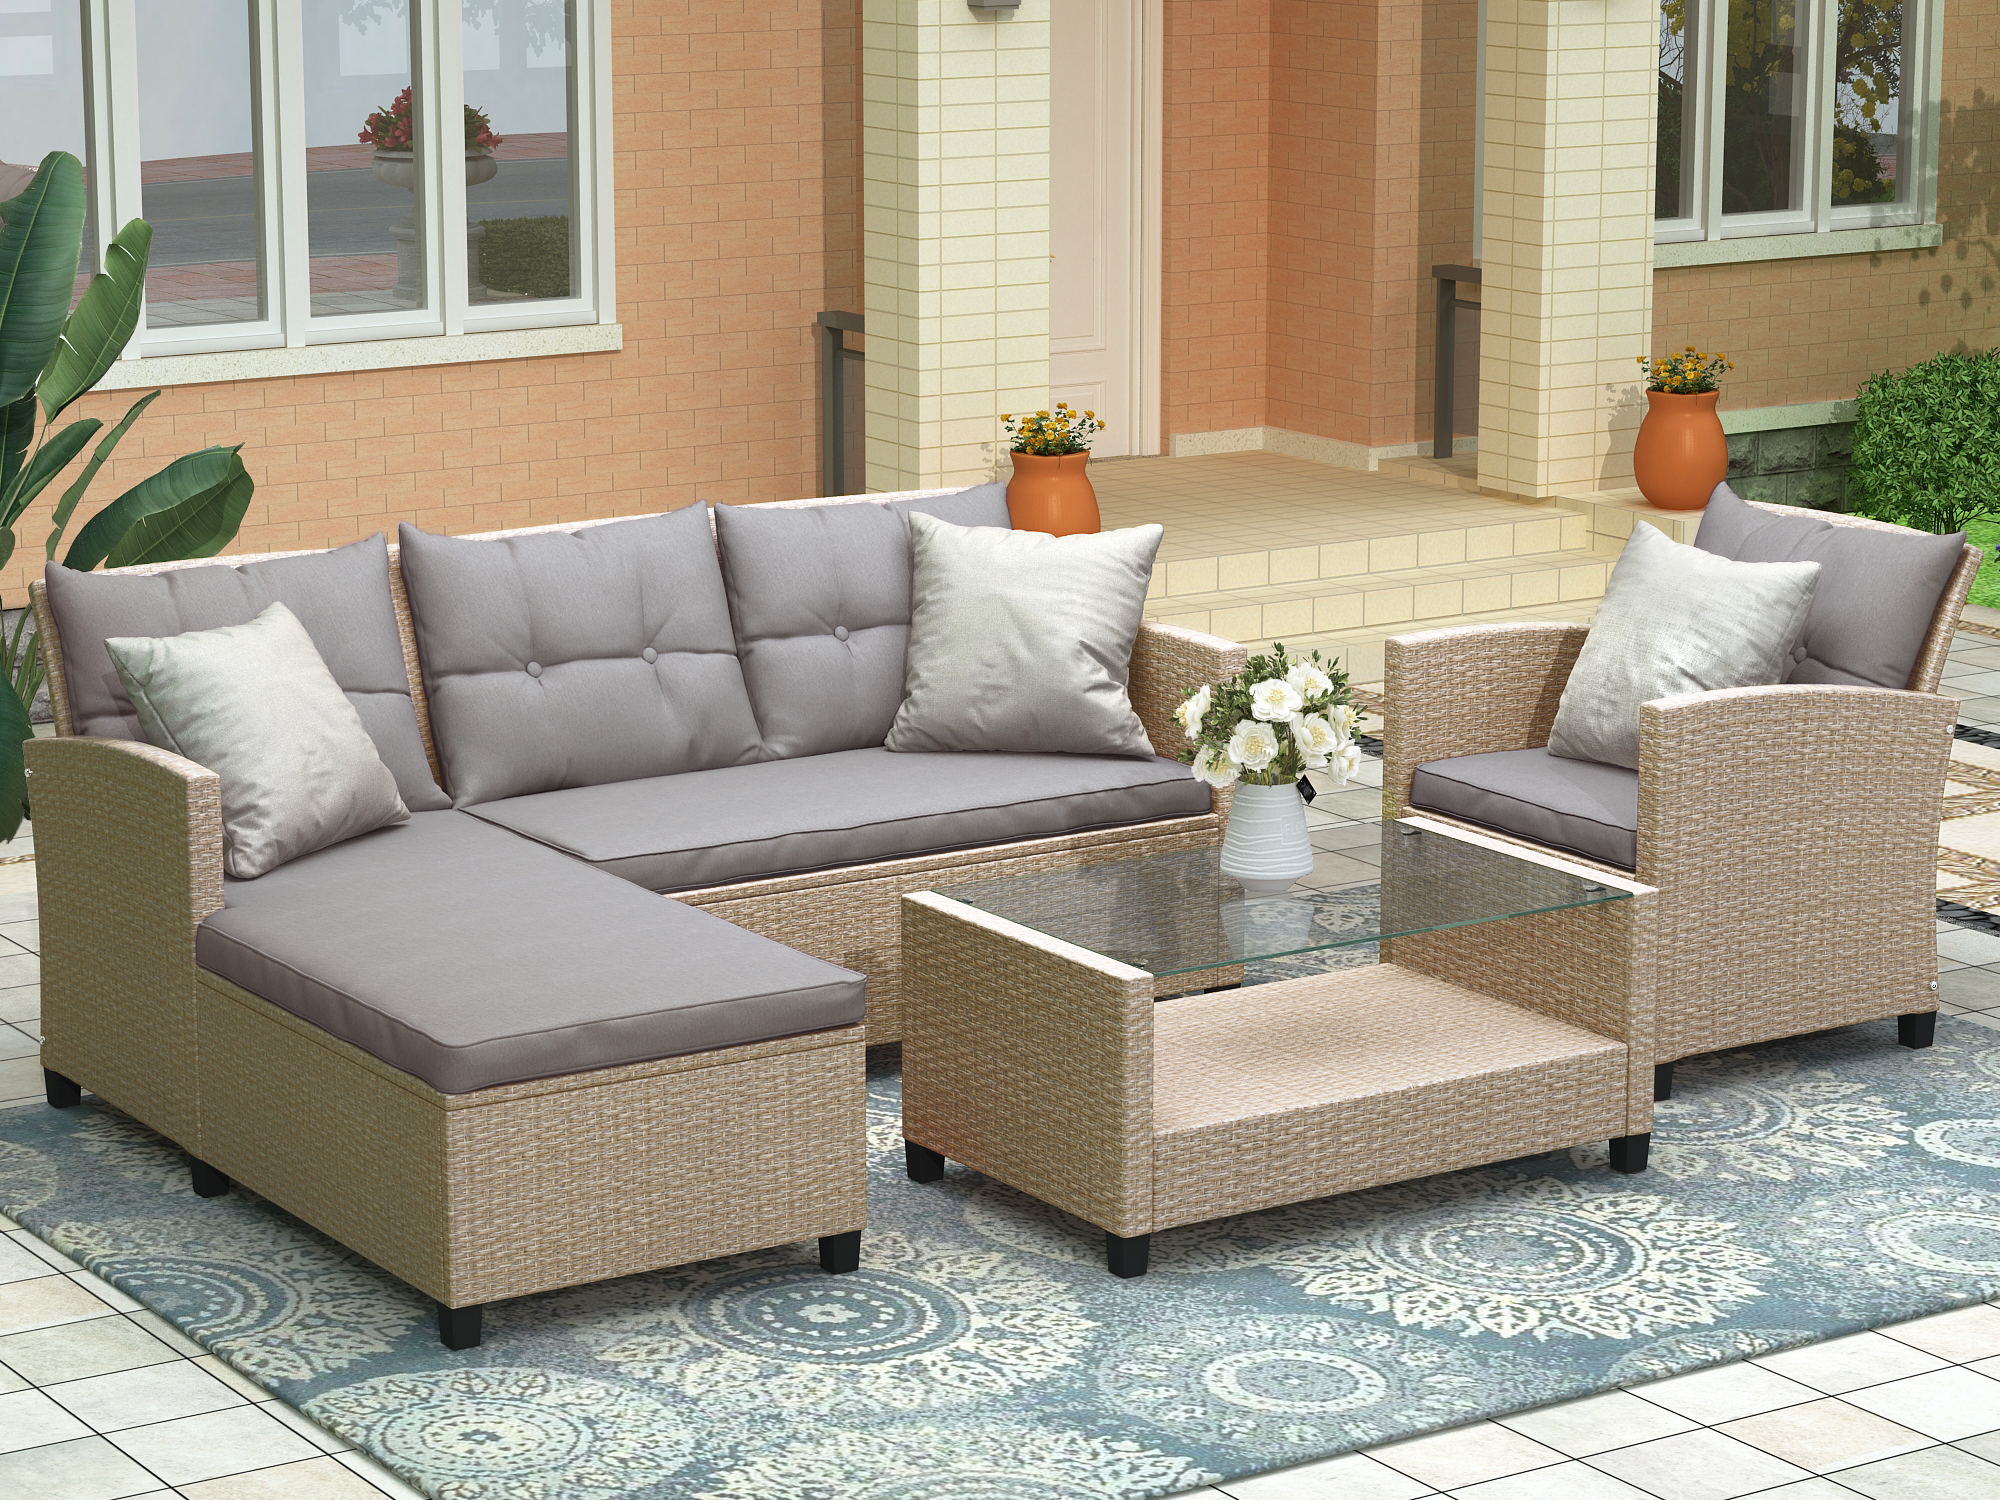 Outdoor Garden Patio Sectional Sofa Sets, SEGMART 4 Pieces Modern Wicker Furniture Set with Storage Tempered Glass Coffee Table, Armchair, Conversation Sets for Porch Poolside Backyard, S1497 - image 2 of 9